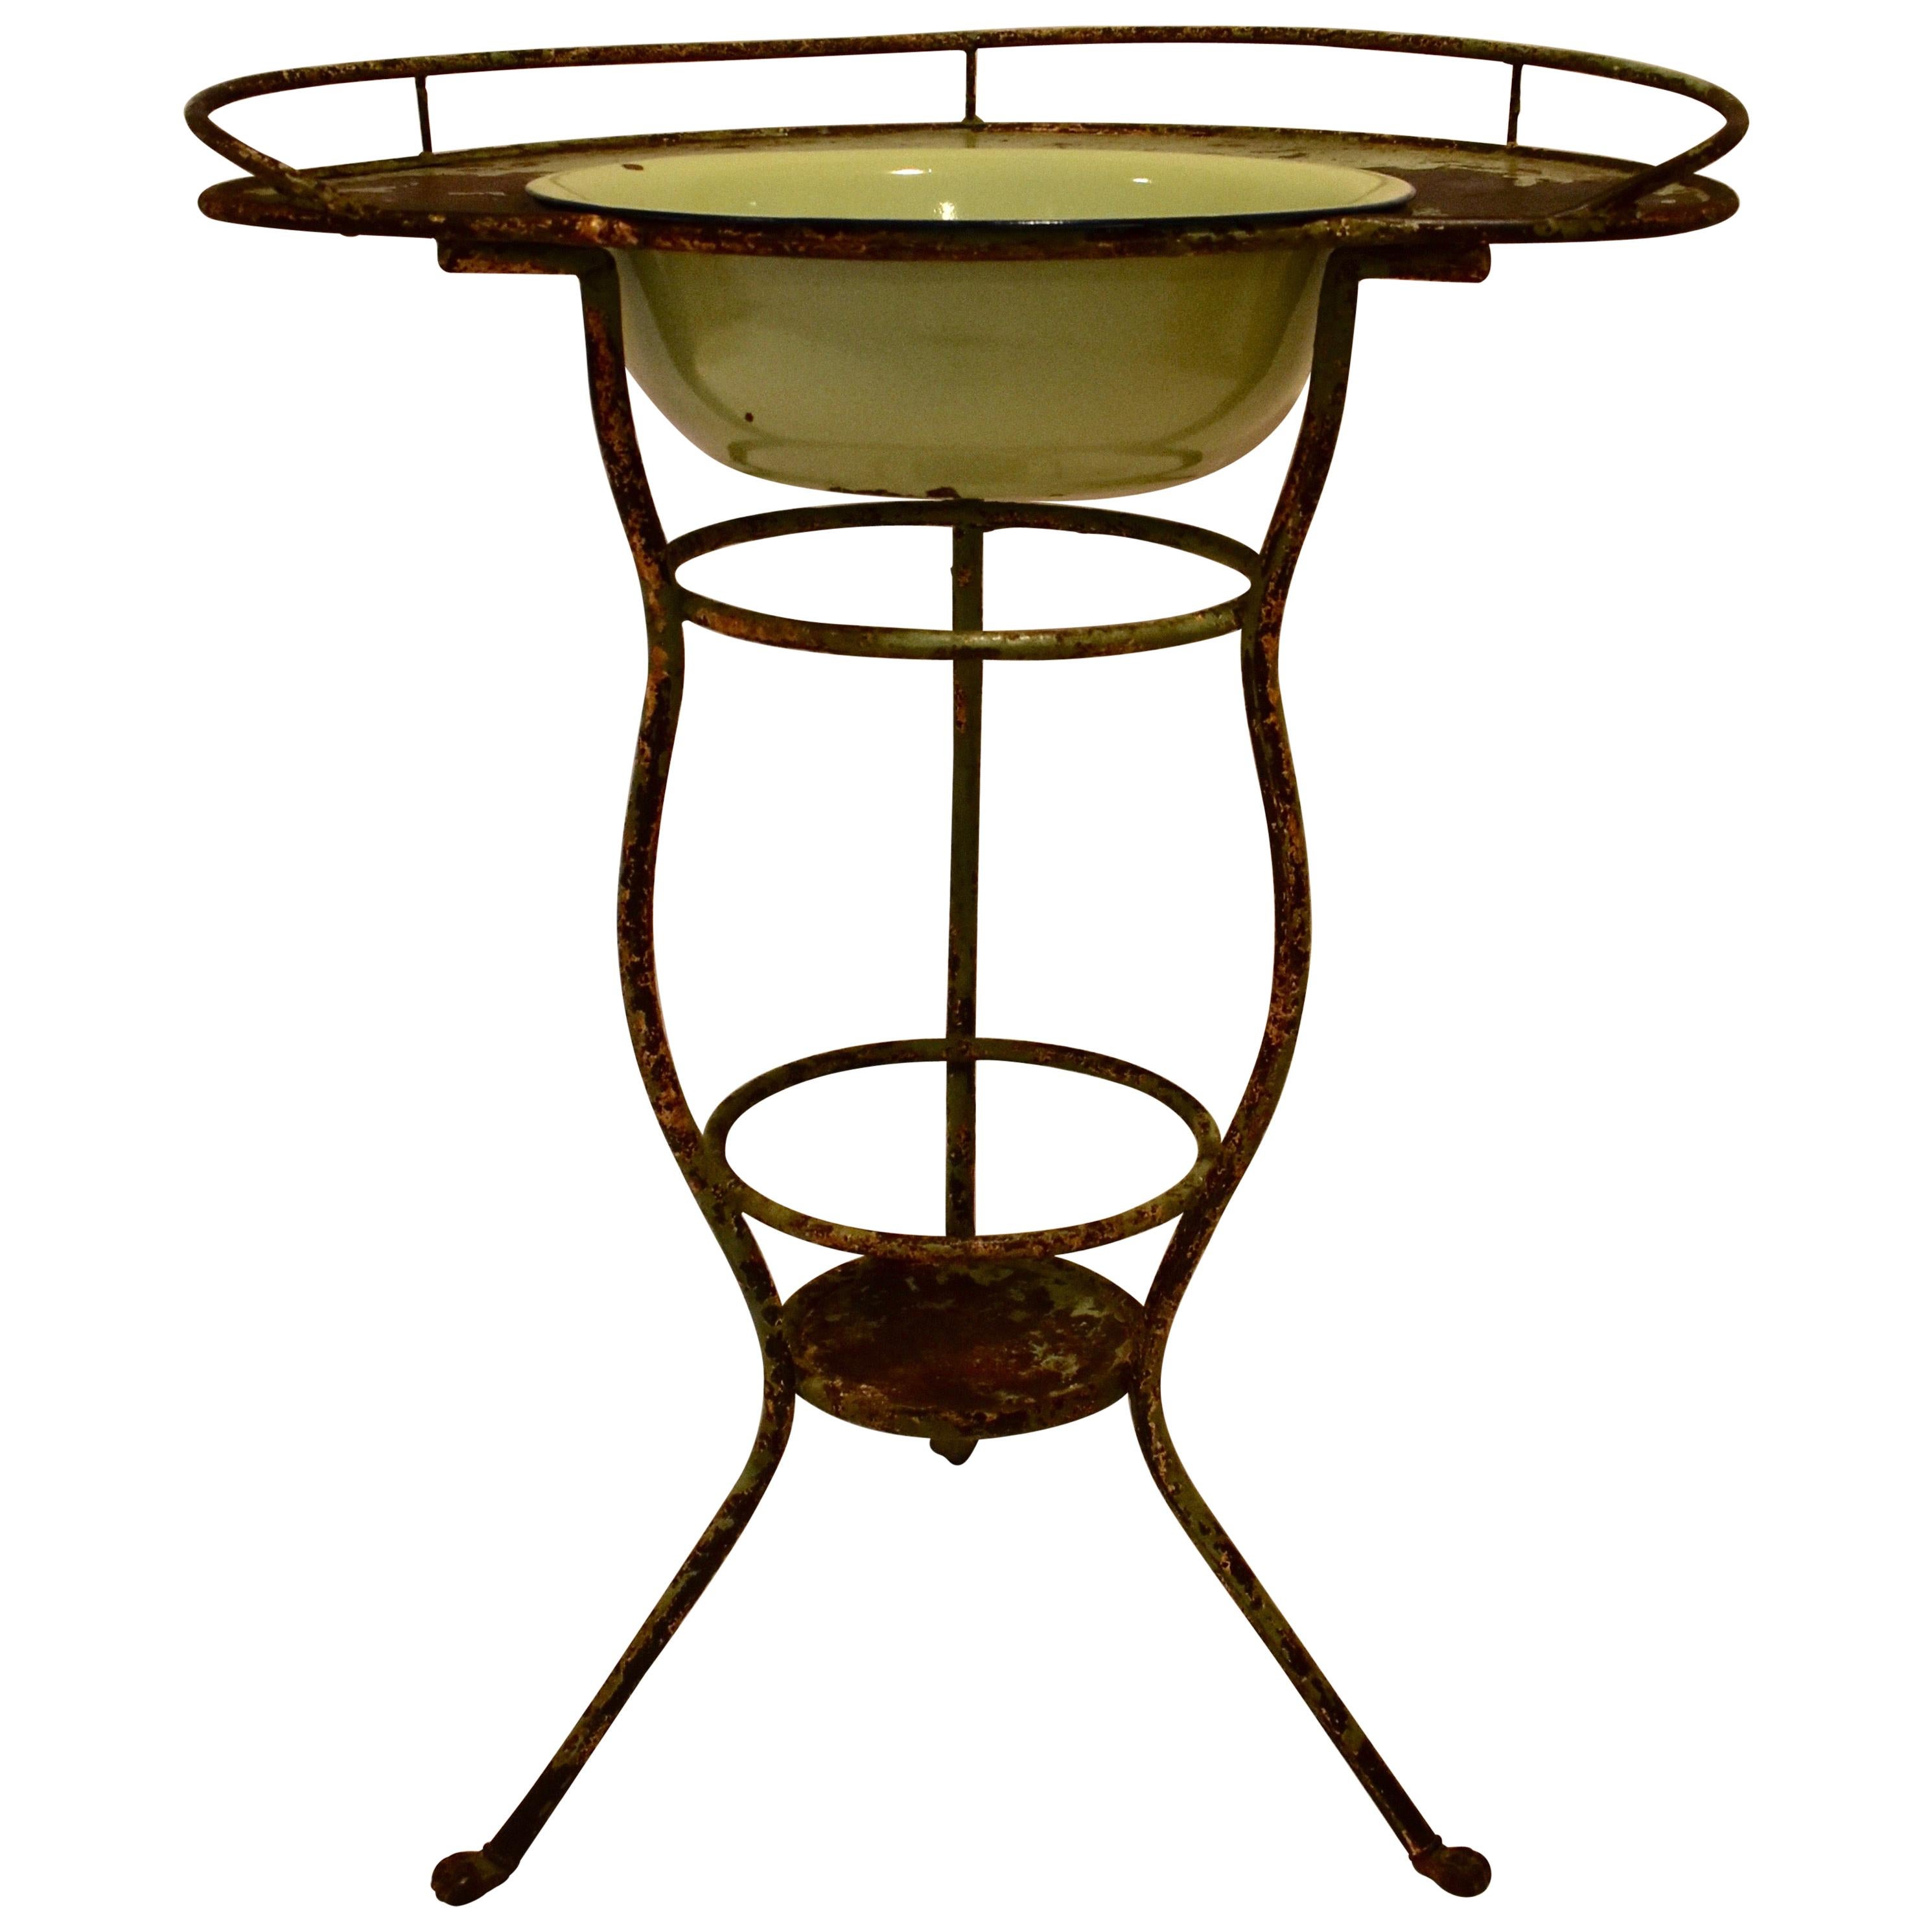 Wrought Iron Tripod Washstand with Enameled Copper Bowl